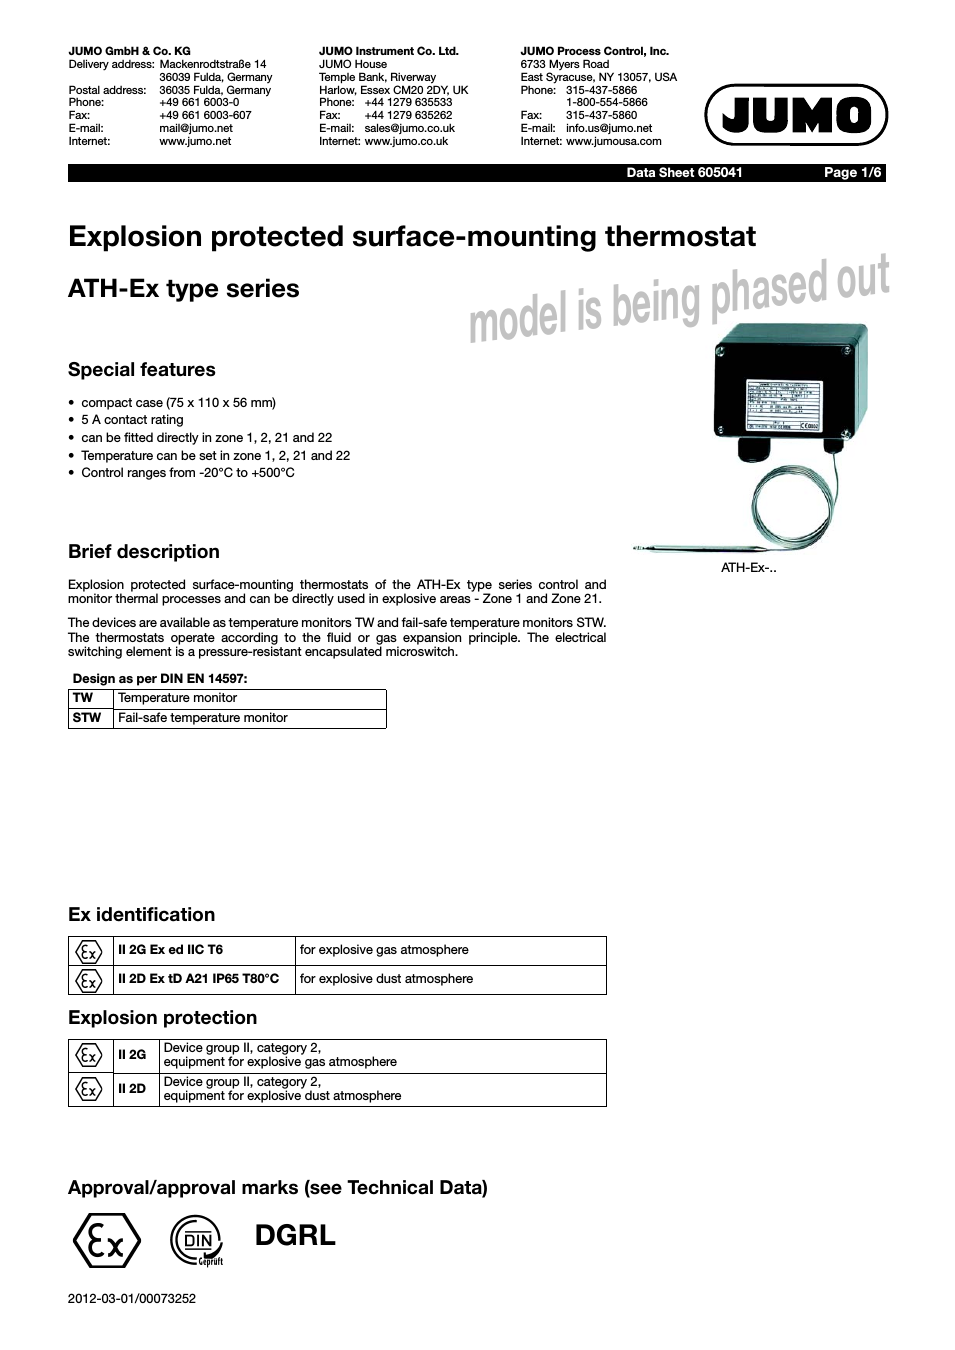 605041 Explosion-protected surface-mounting thermostat, ATH-EX Data Sheet